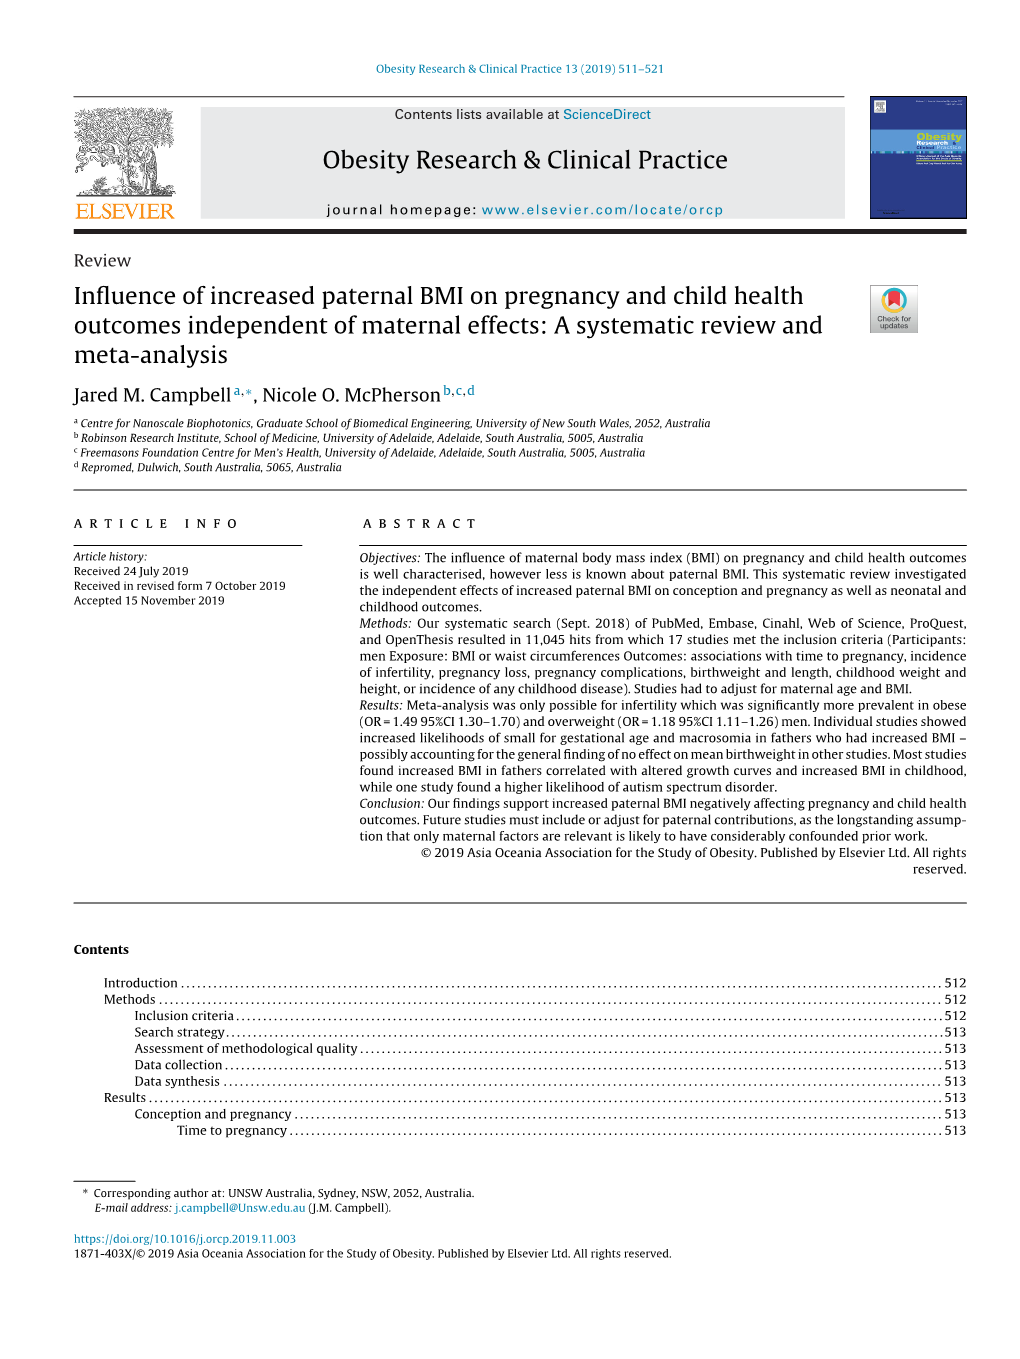 Influence of Increased Paternal BMI on Pregnancy and Child Health